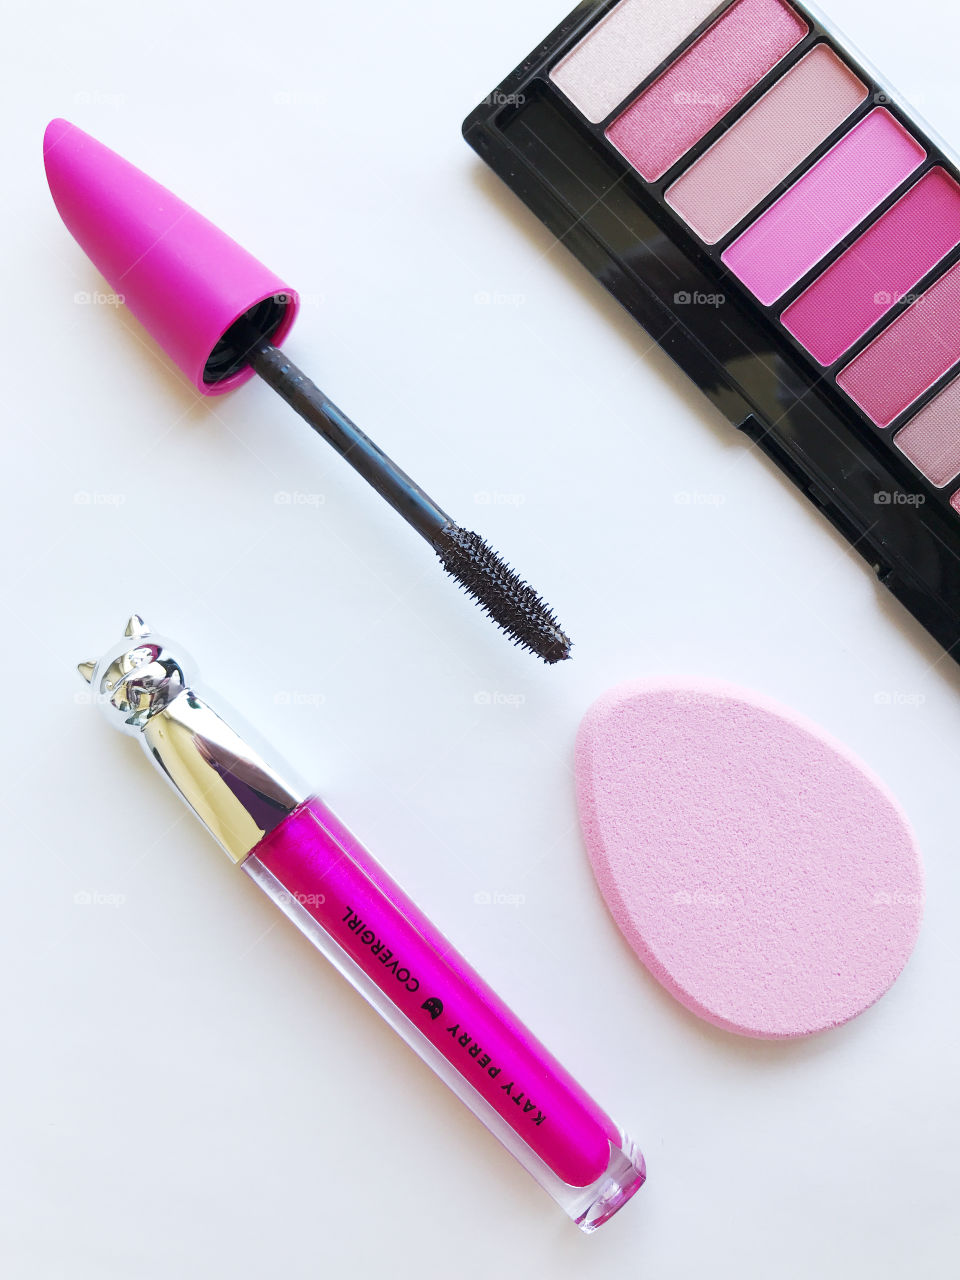 A collection of pretty in pink makeup products for putting on in the morning to look beautiful!